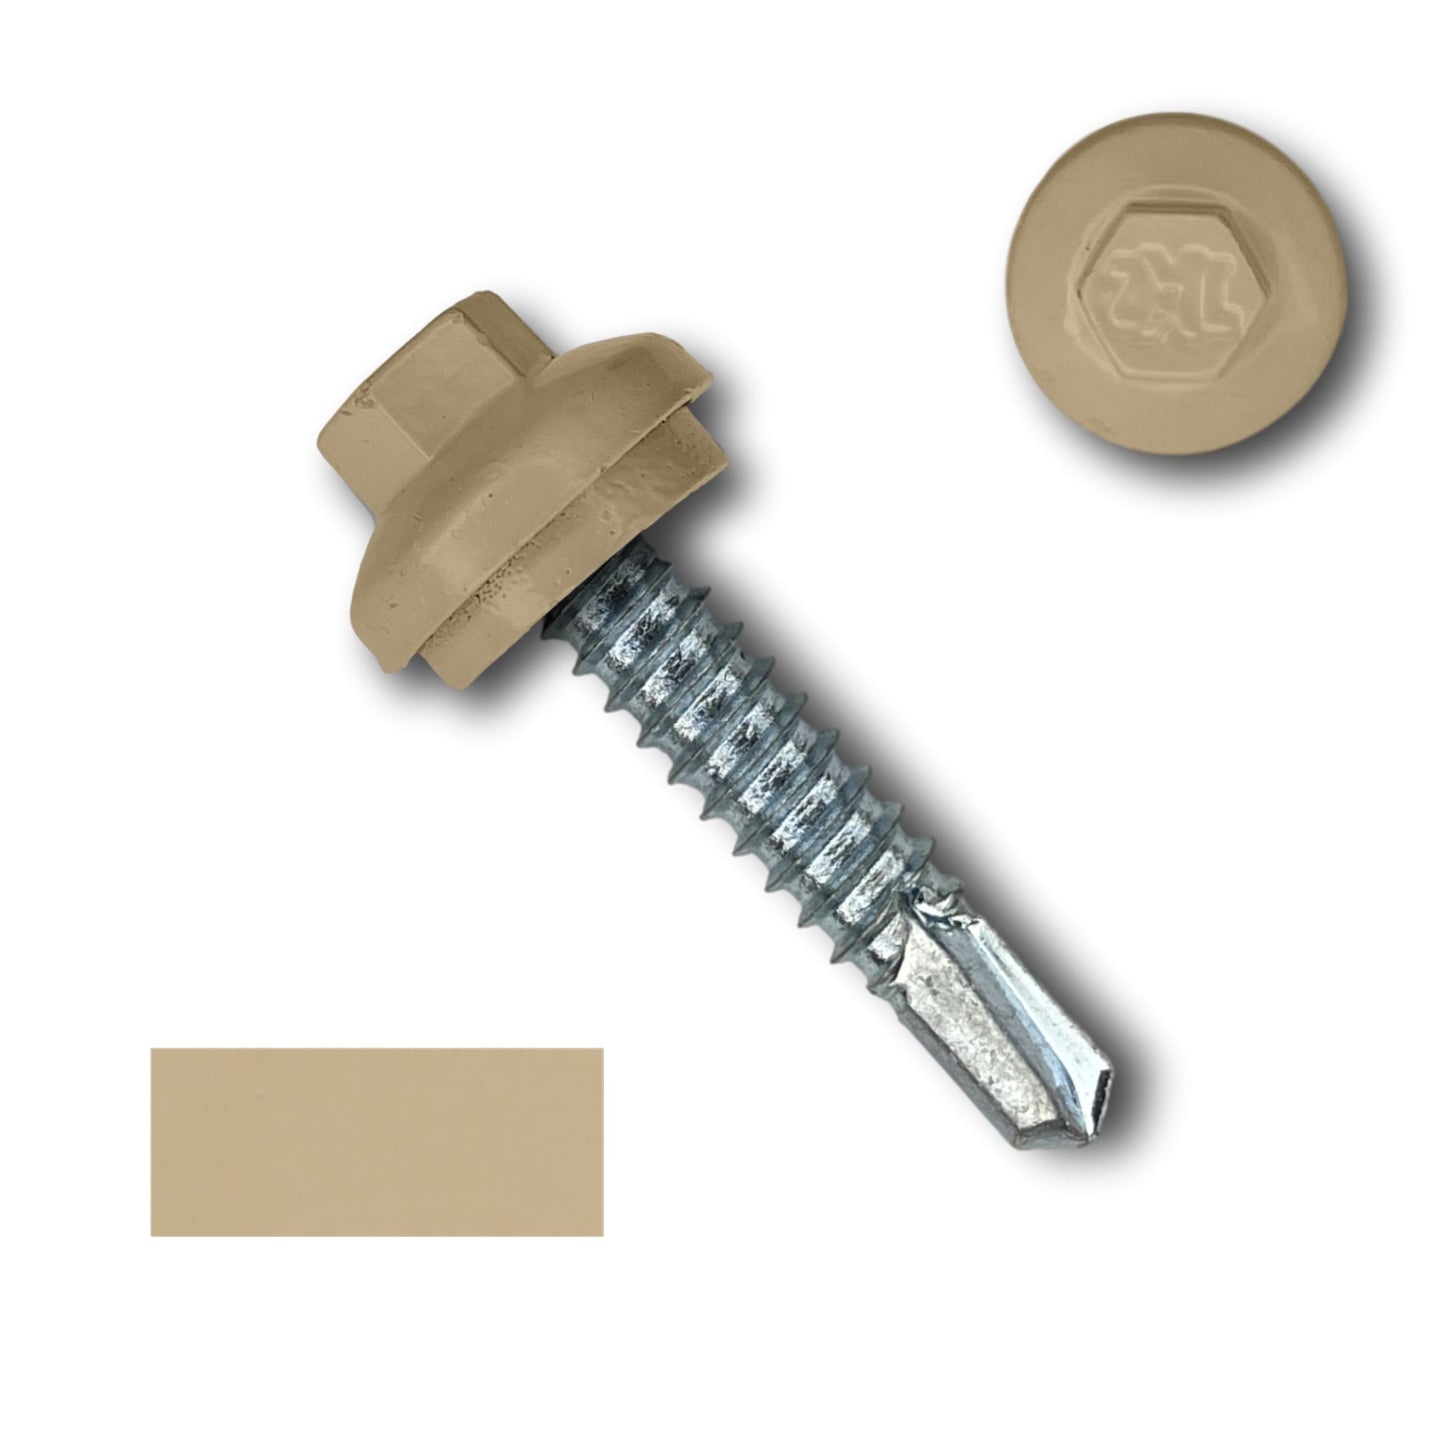 A #14 x 1.25" ZXL Dome Cap Metal Building Screw (Metal-to-Metal), Self-Drilling - 250, 500, or 1000 Pack with a tan coating from Perma Cover. The screw has a sharp pointed end and an integrated washer under the hex head. Also shown is a detached ZXL Dome Cap and a rectangular sample of the same tan color, making it ideal for use as metal building screws.

